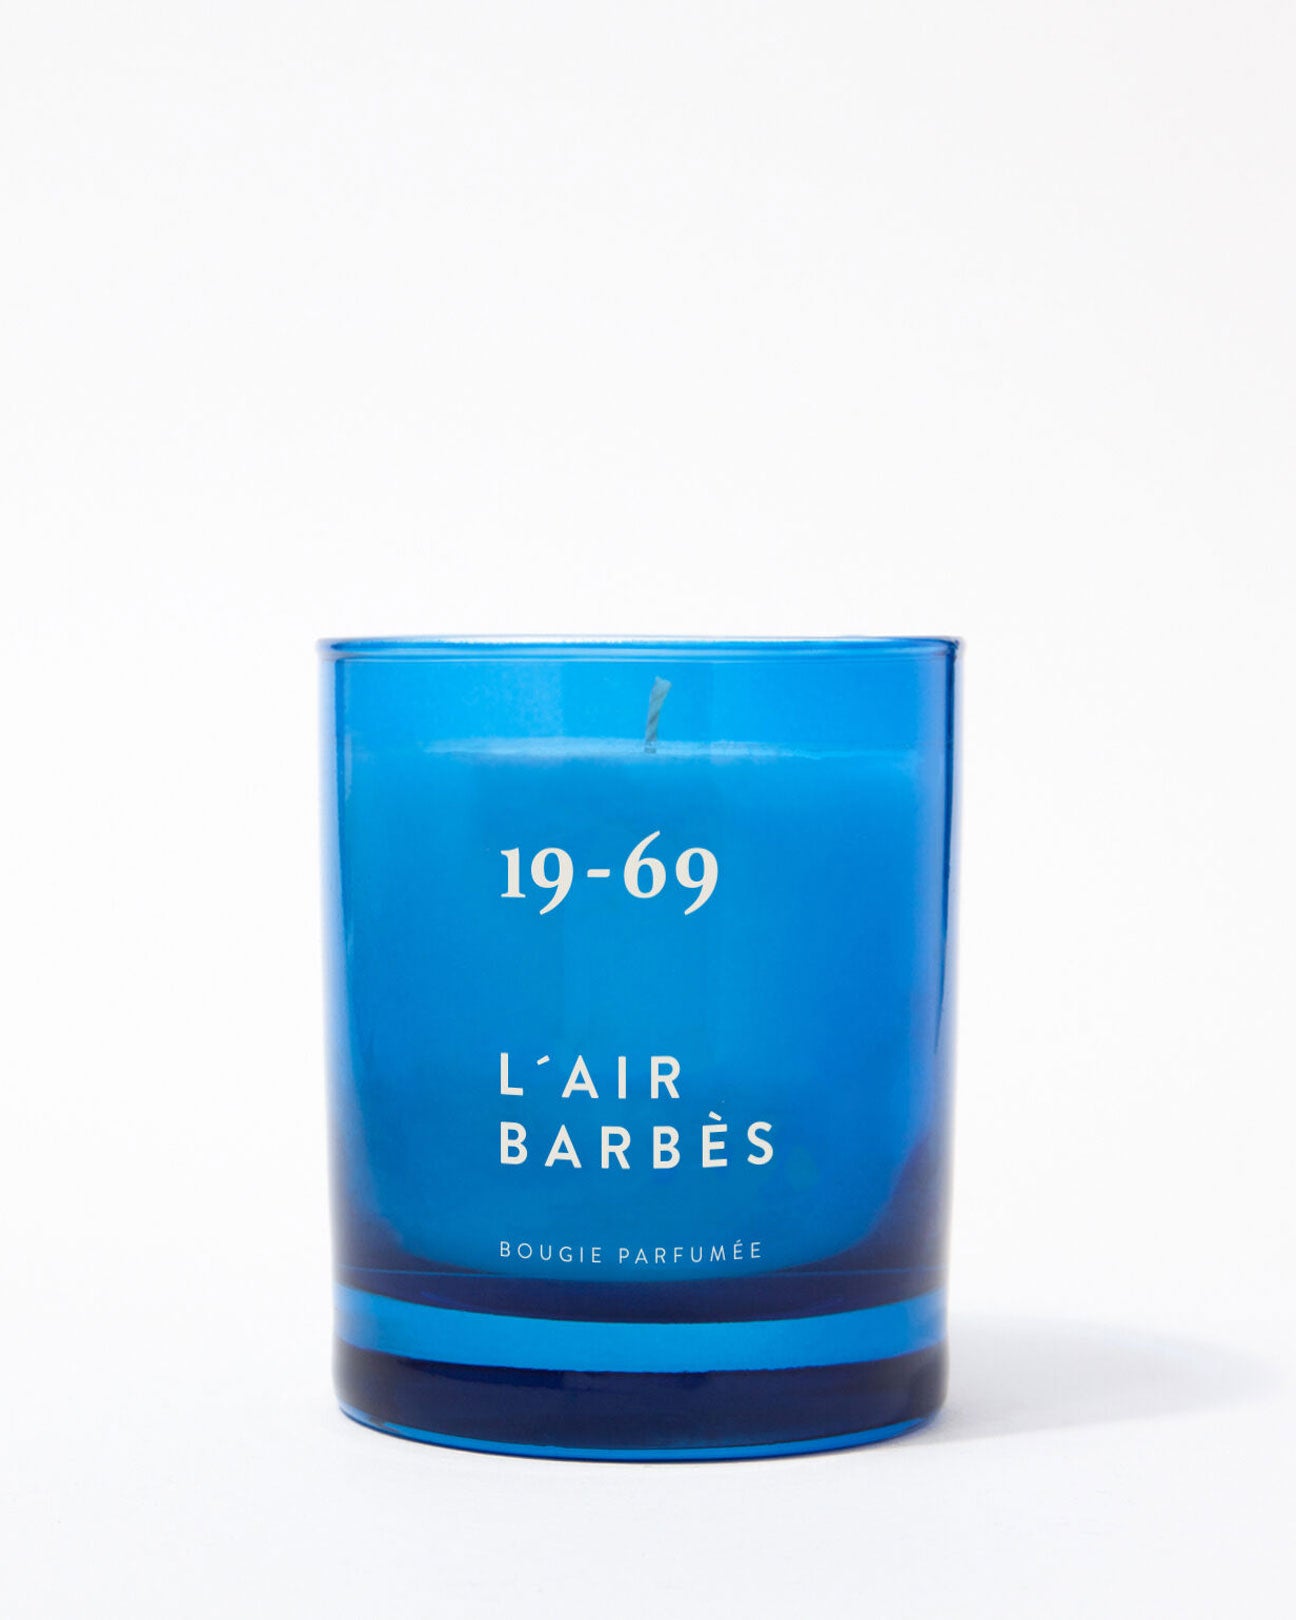 19-69 Candle in L'Air Barbès available at Lahn.shop